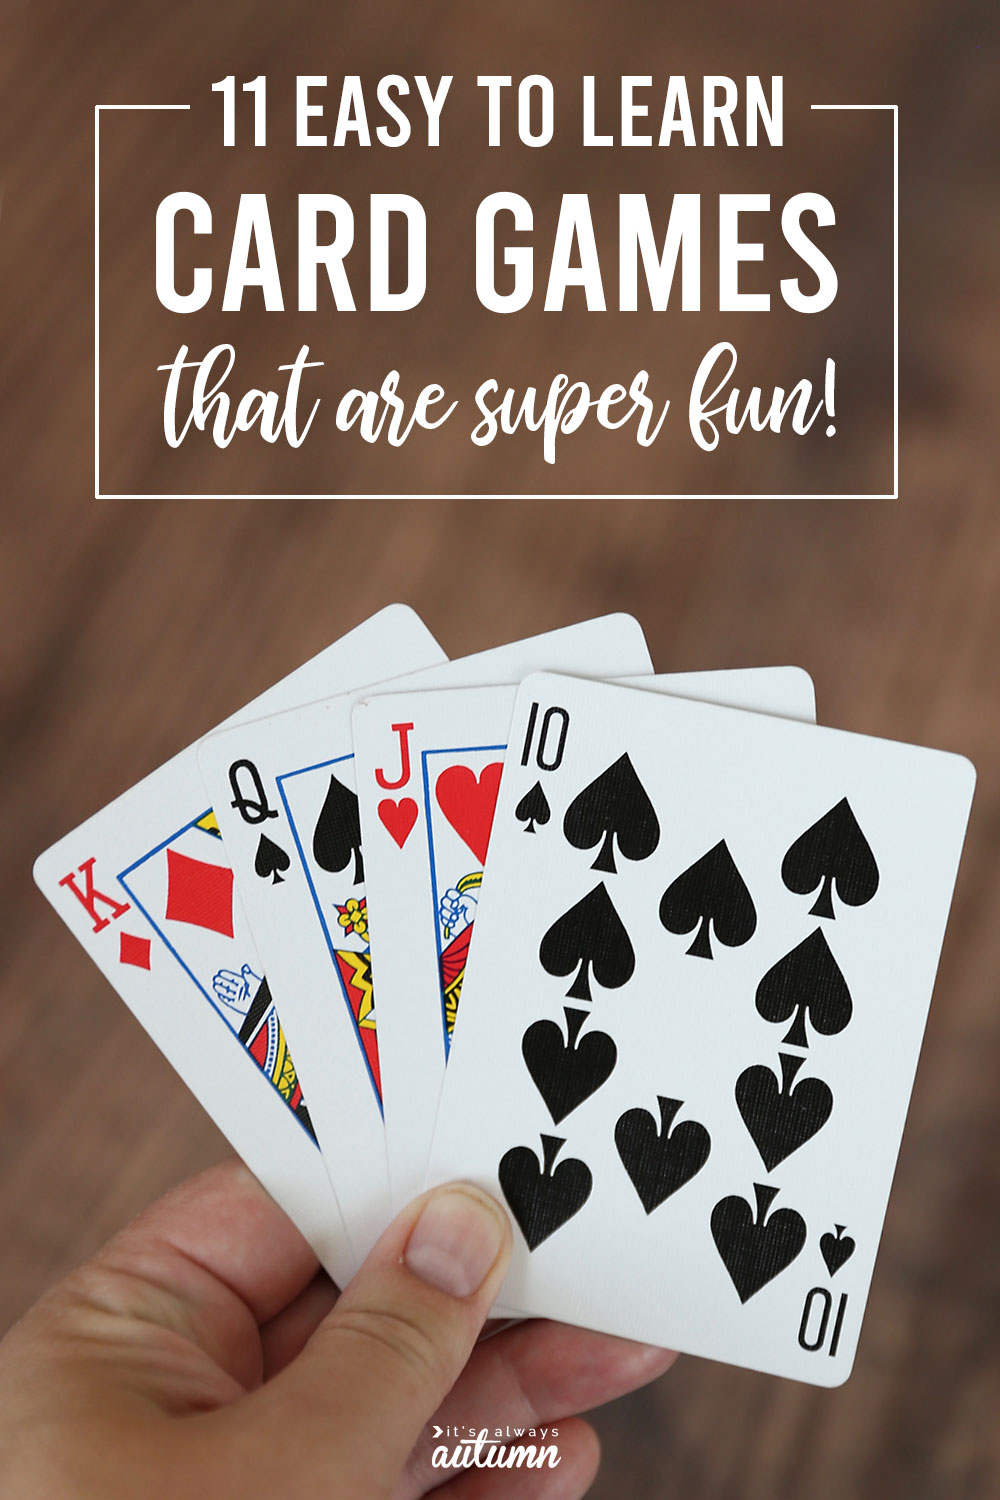 These easy card games are tons of fun!